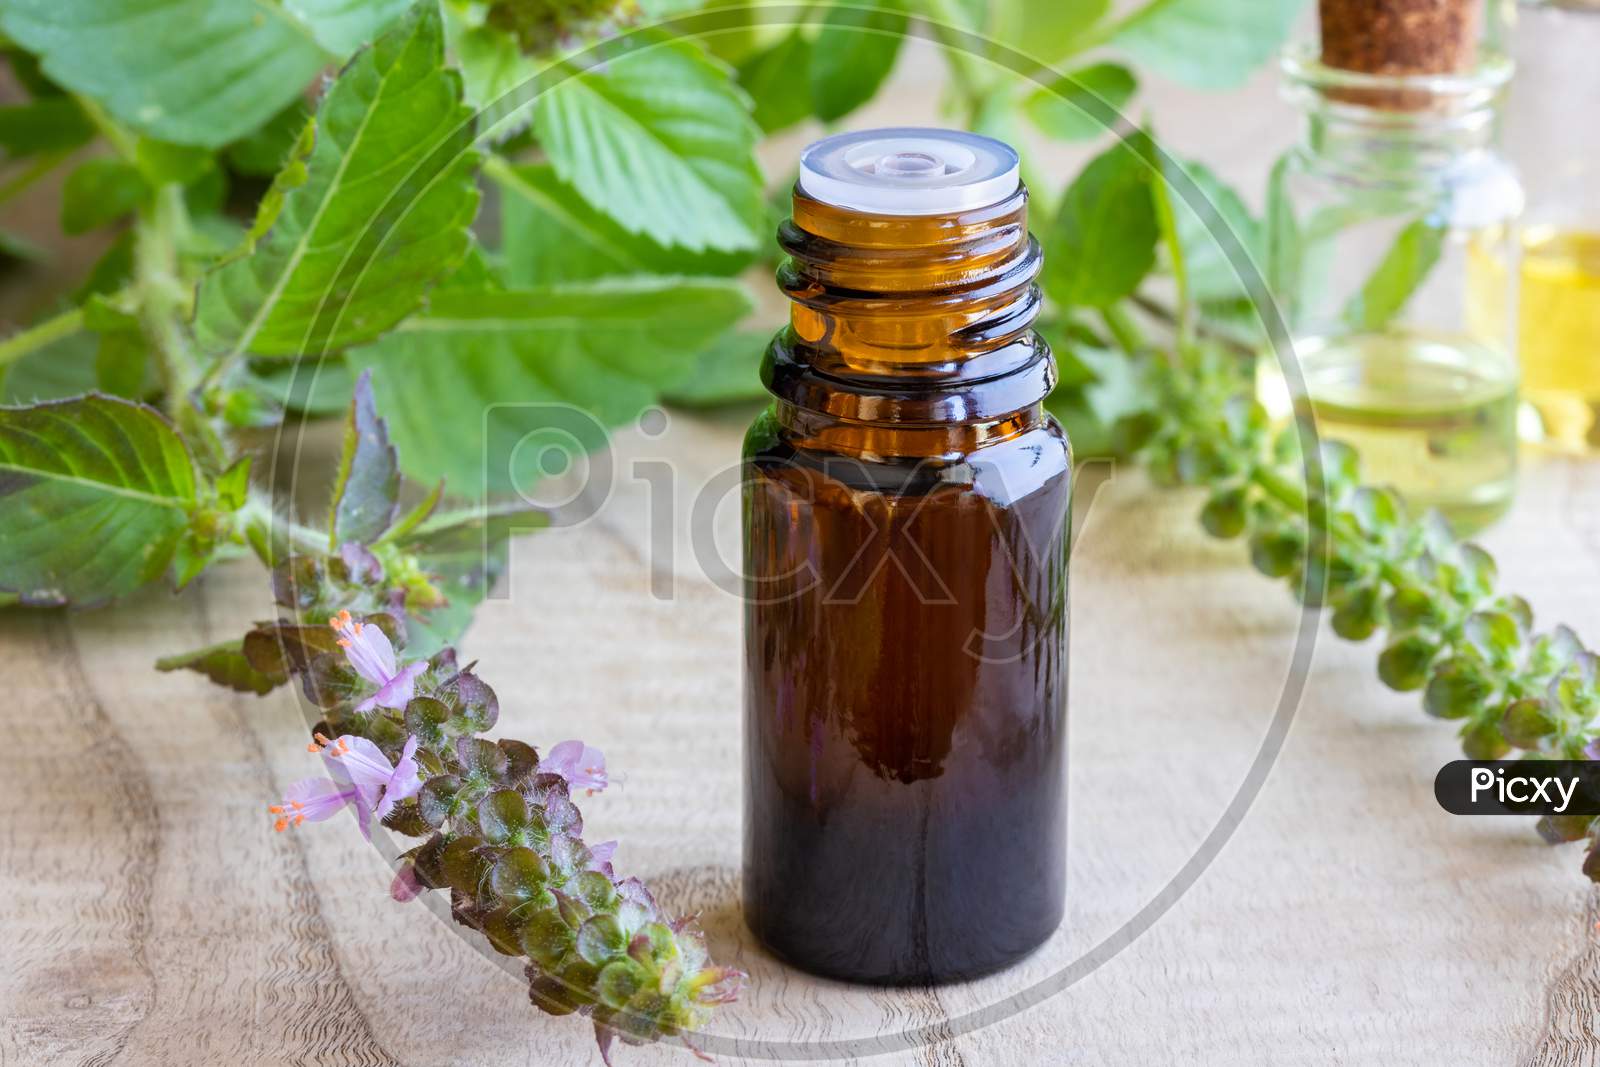 A Bottle Of Tulsi Essential Oil With Fresh Tulsi, Or Holy Basil Plant